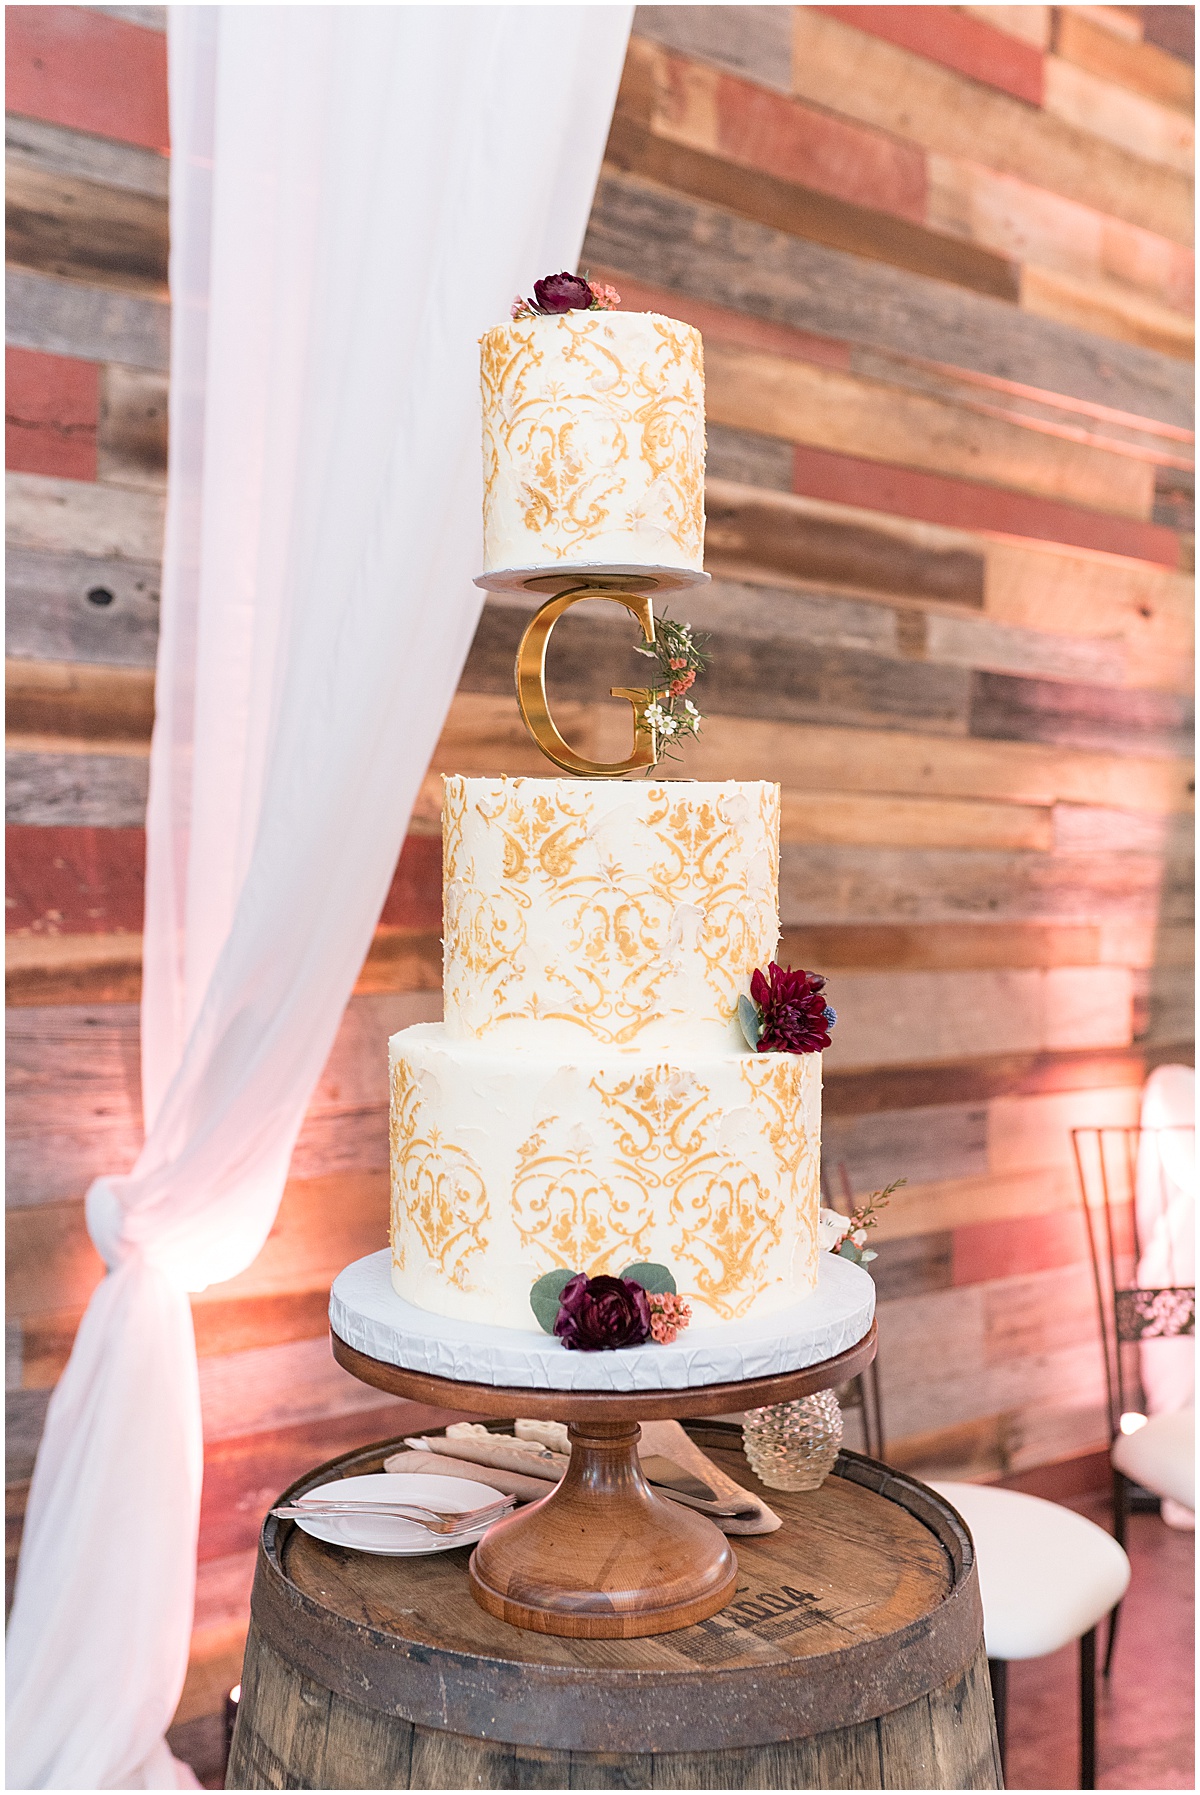 White and gold wedding cake at Finley Creek Vineyards wedding in Zionsville, Indiana